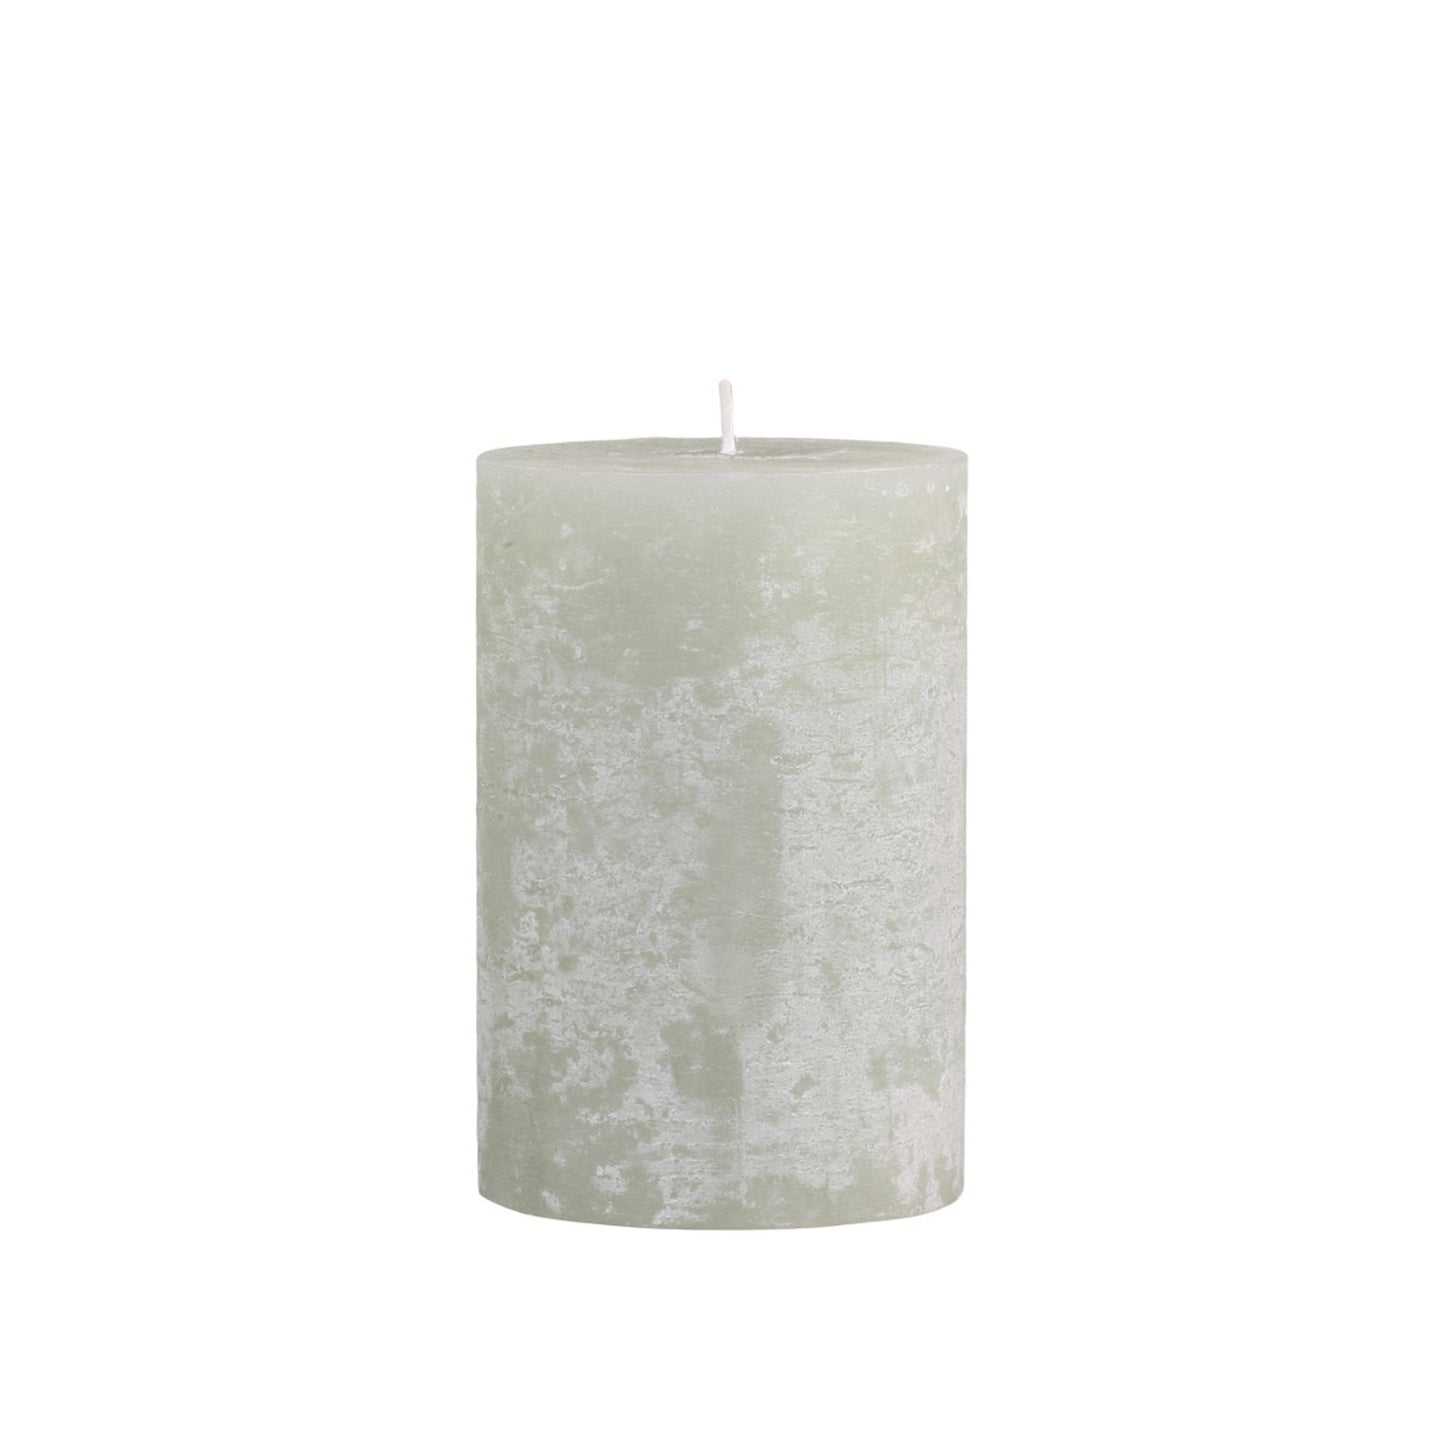 Verte Rustic Pillar Candle 90 hours - Bumble Living